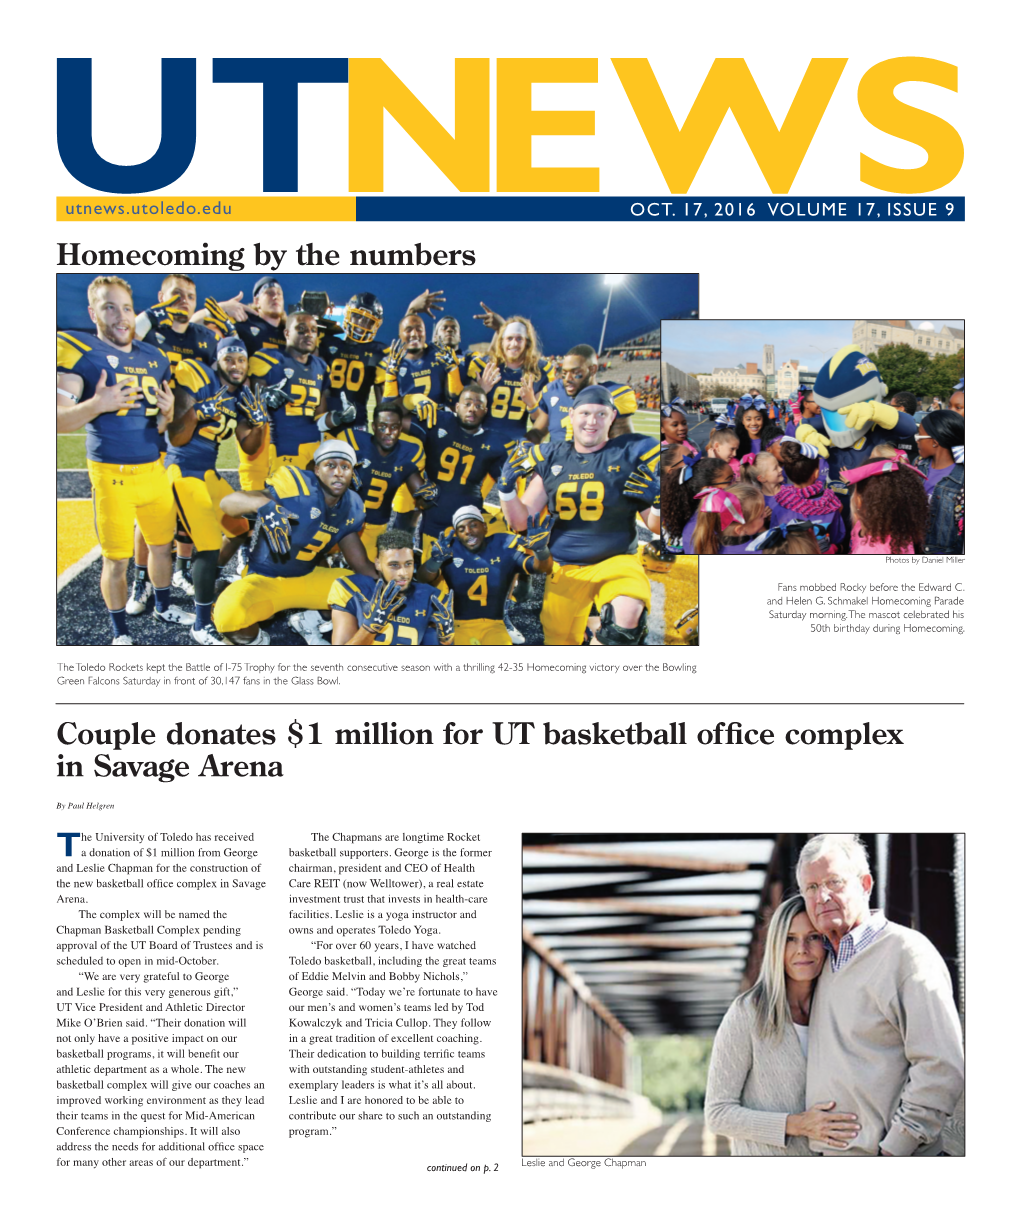 Couple Donates $1 Million for UT Basketball Office Complex in Savage Arena